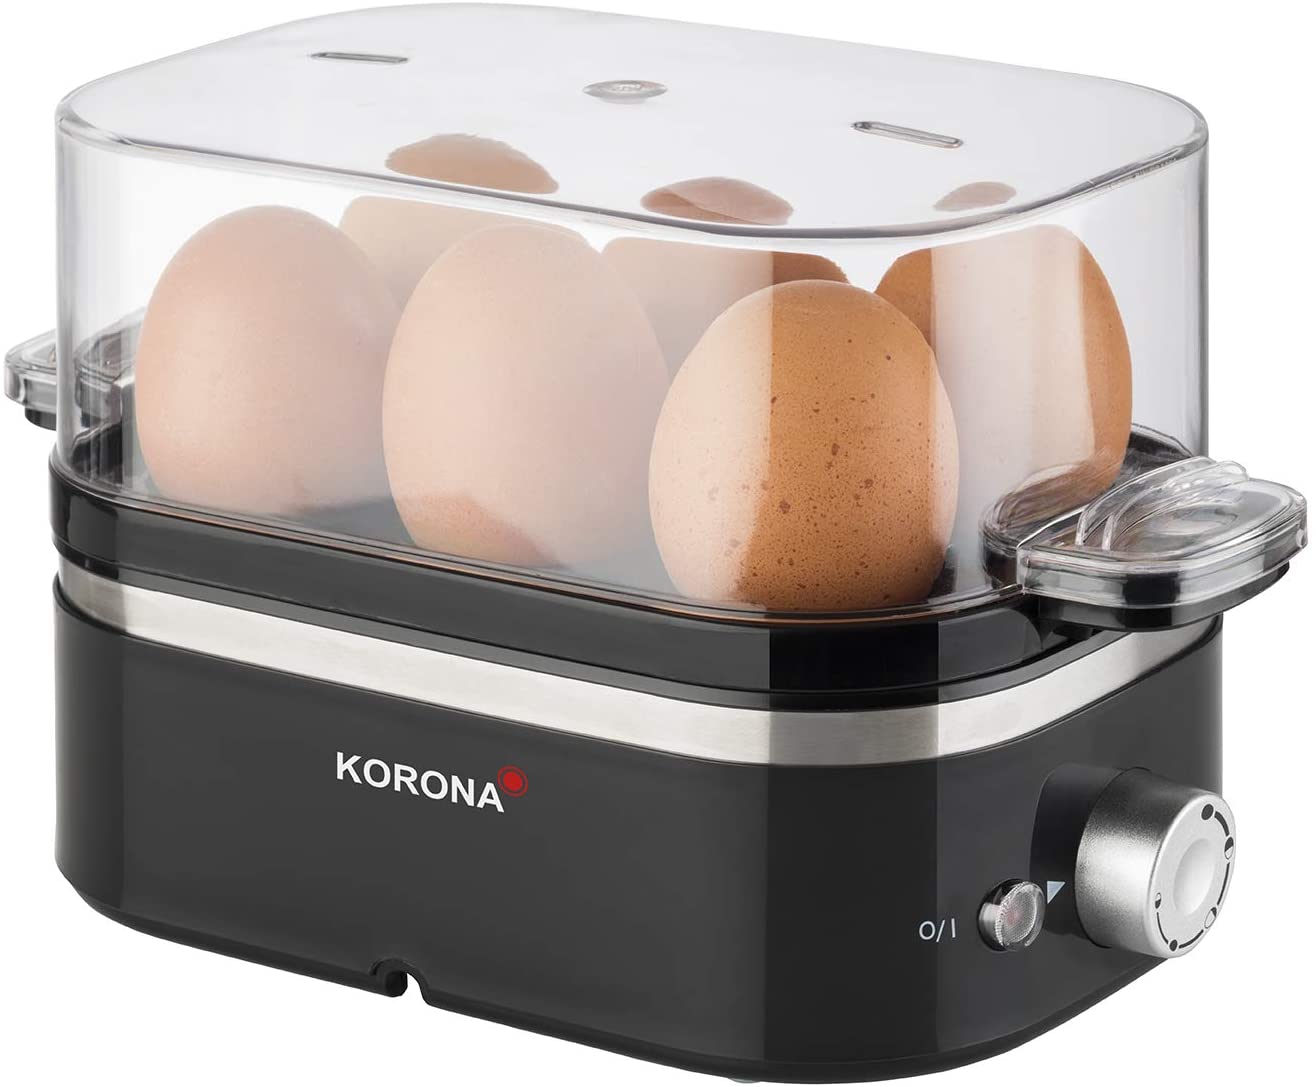 Korona 25306 Egg Cooker 1 to 6 Eggs 400 Watt Max. Adjustable Hardness Measuring Cup with Egg Slicer Included